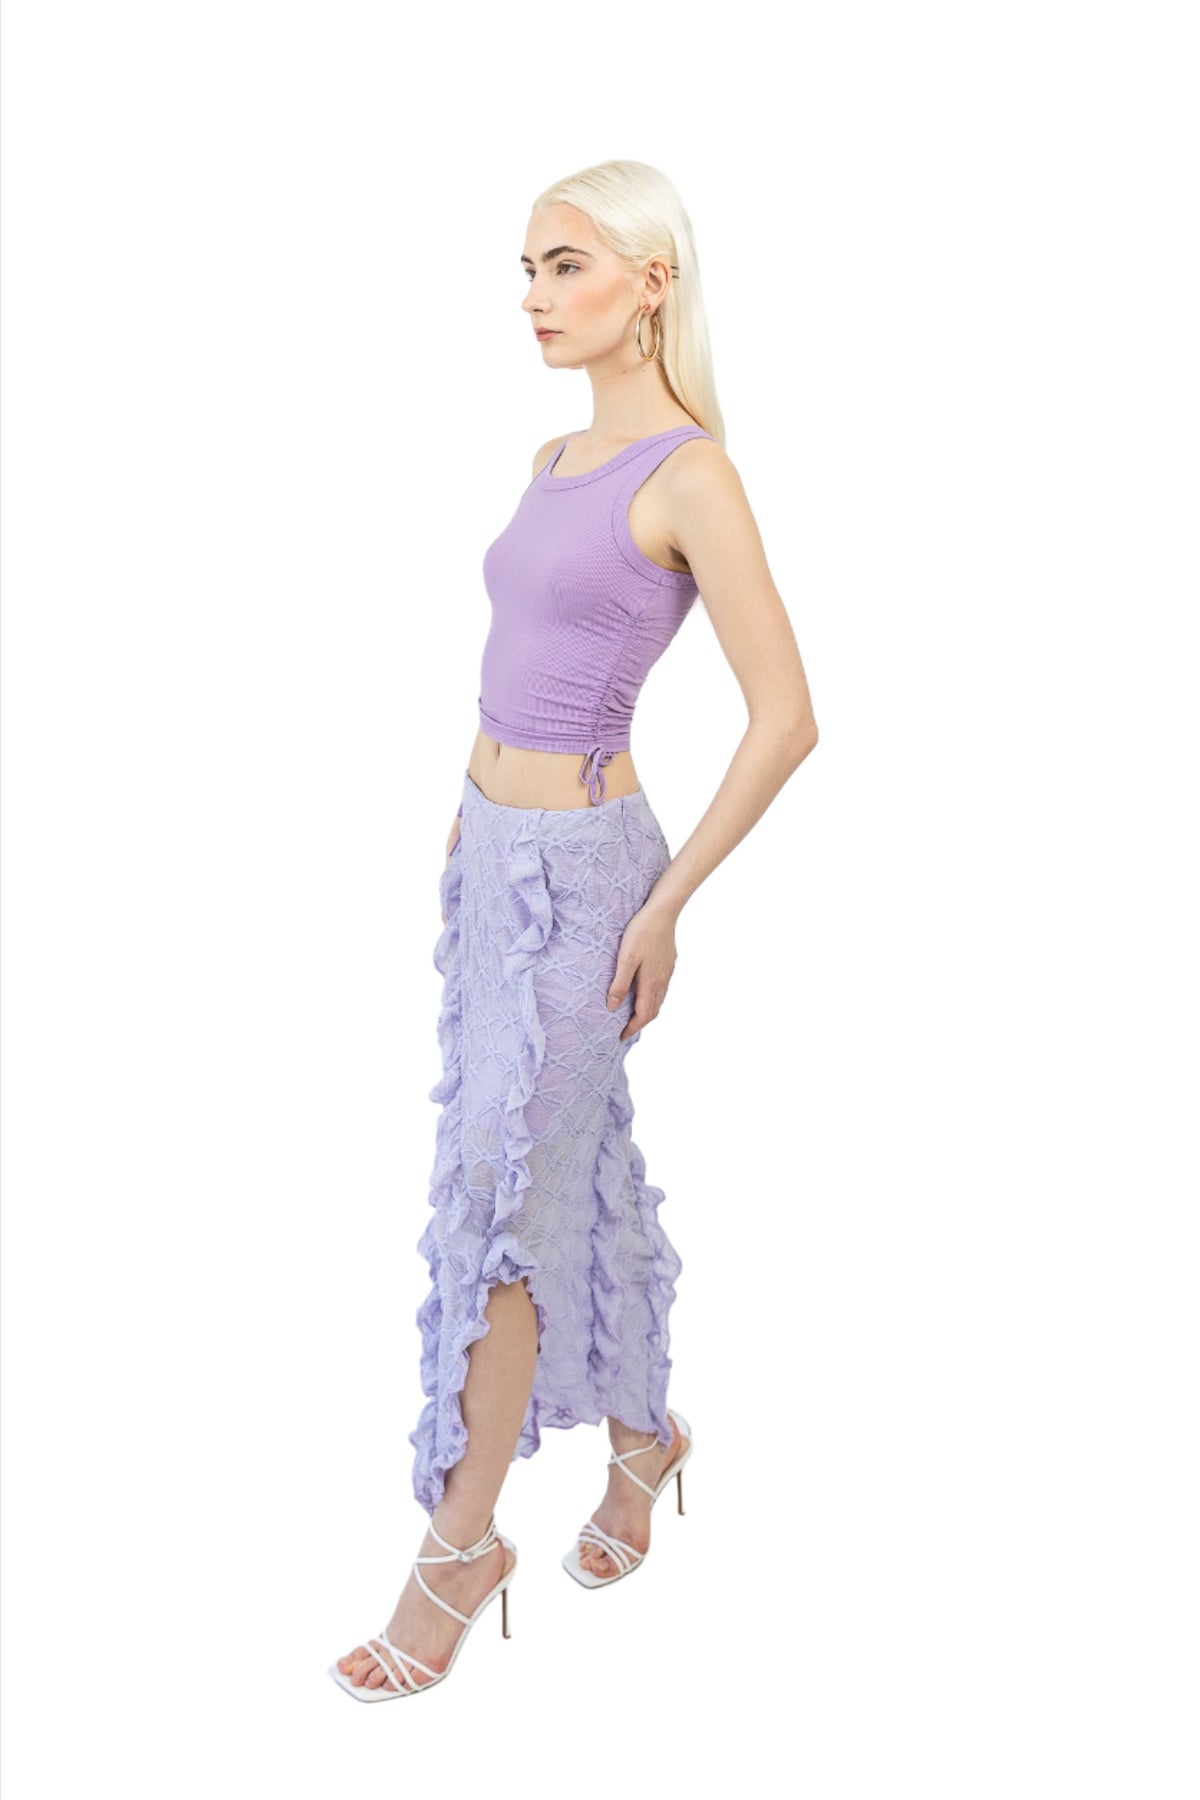 Model wears Mermaid Maxi Skirt in Lilac. Left side facing. Styled with a purple top.